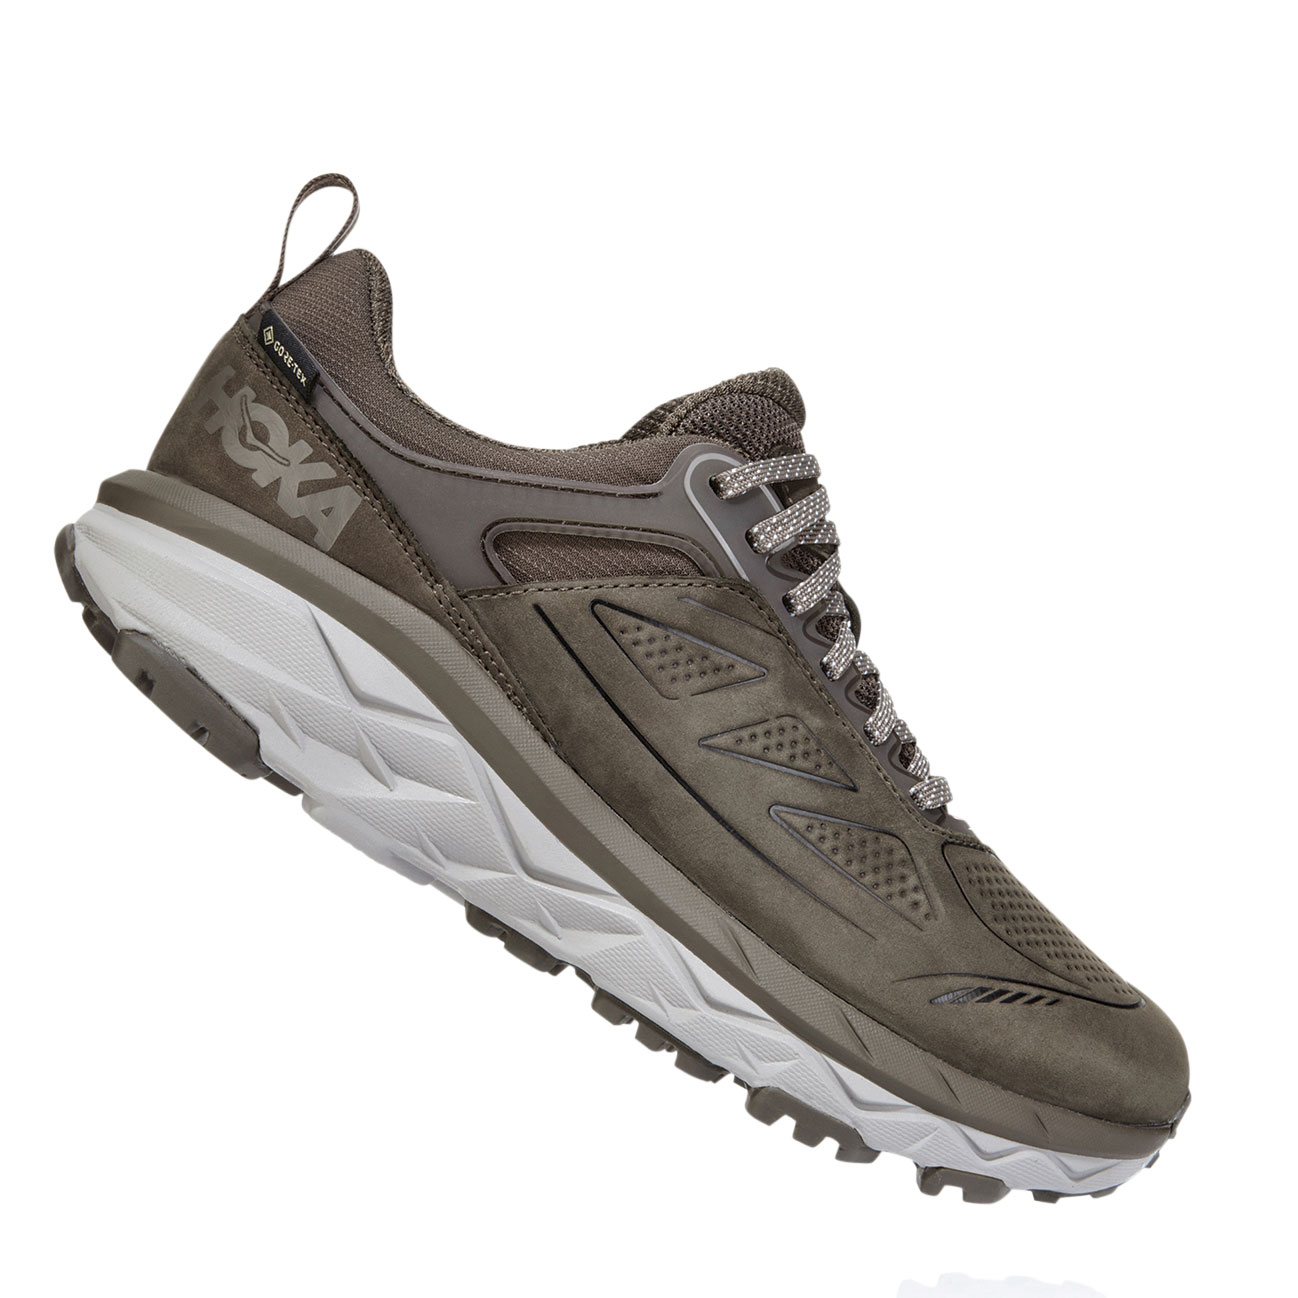 Hoka One One Challenger Low Gtx W - Trail Running Shoes - buy online at ...